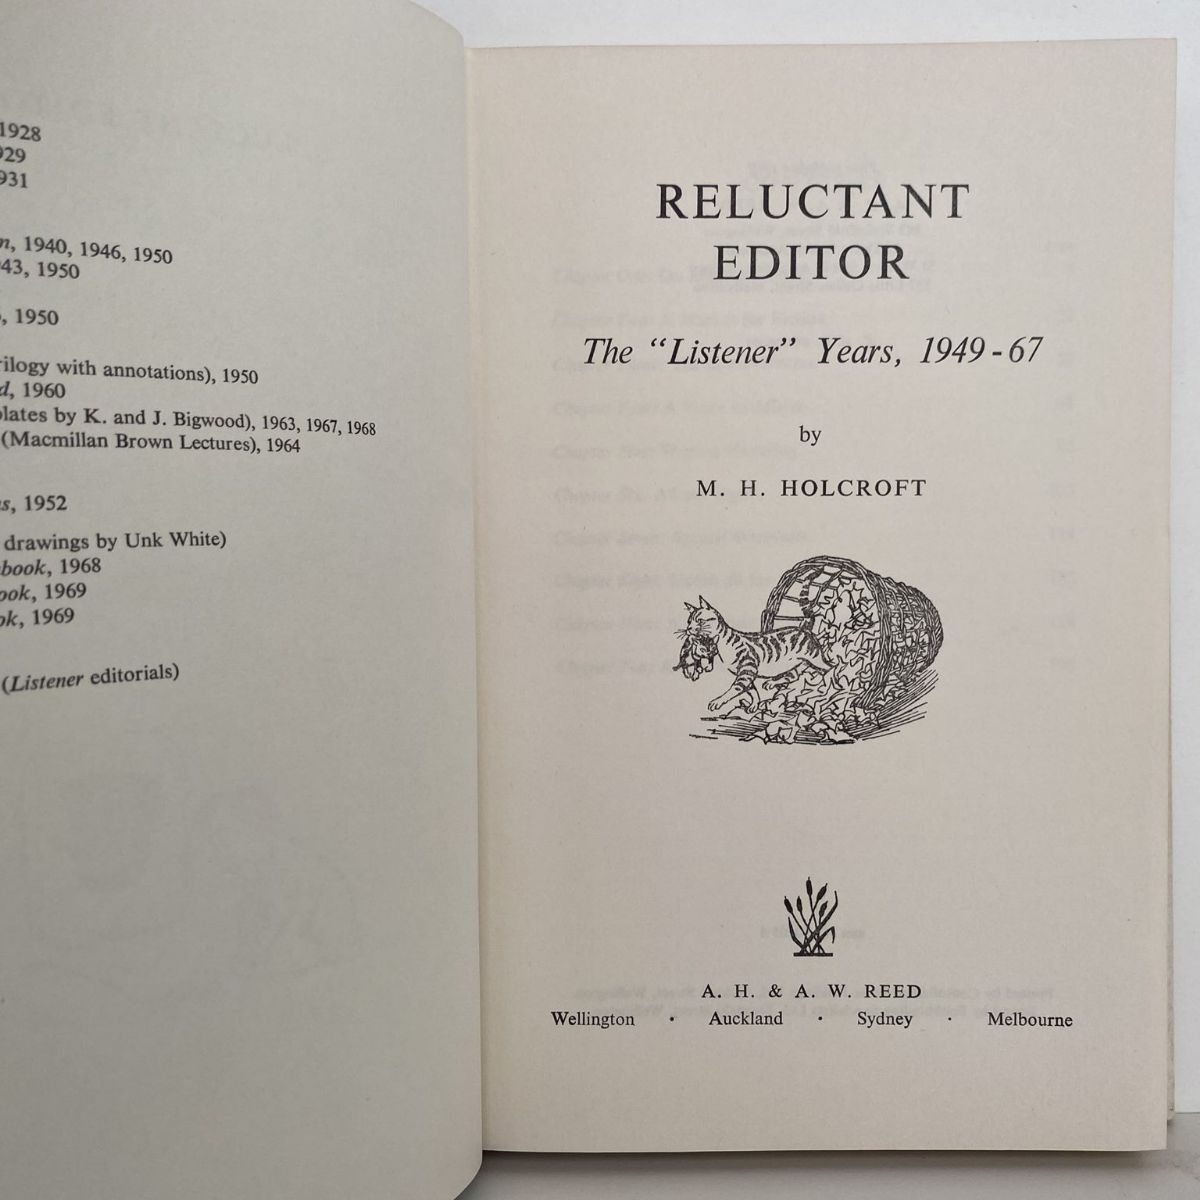 RELUCTANT EDITOR: The Listener Years 1949 - 1967